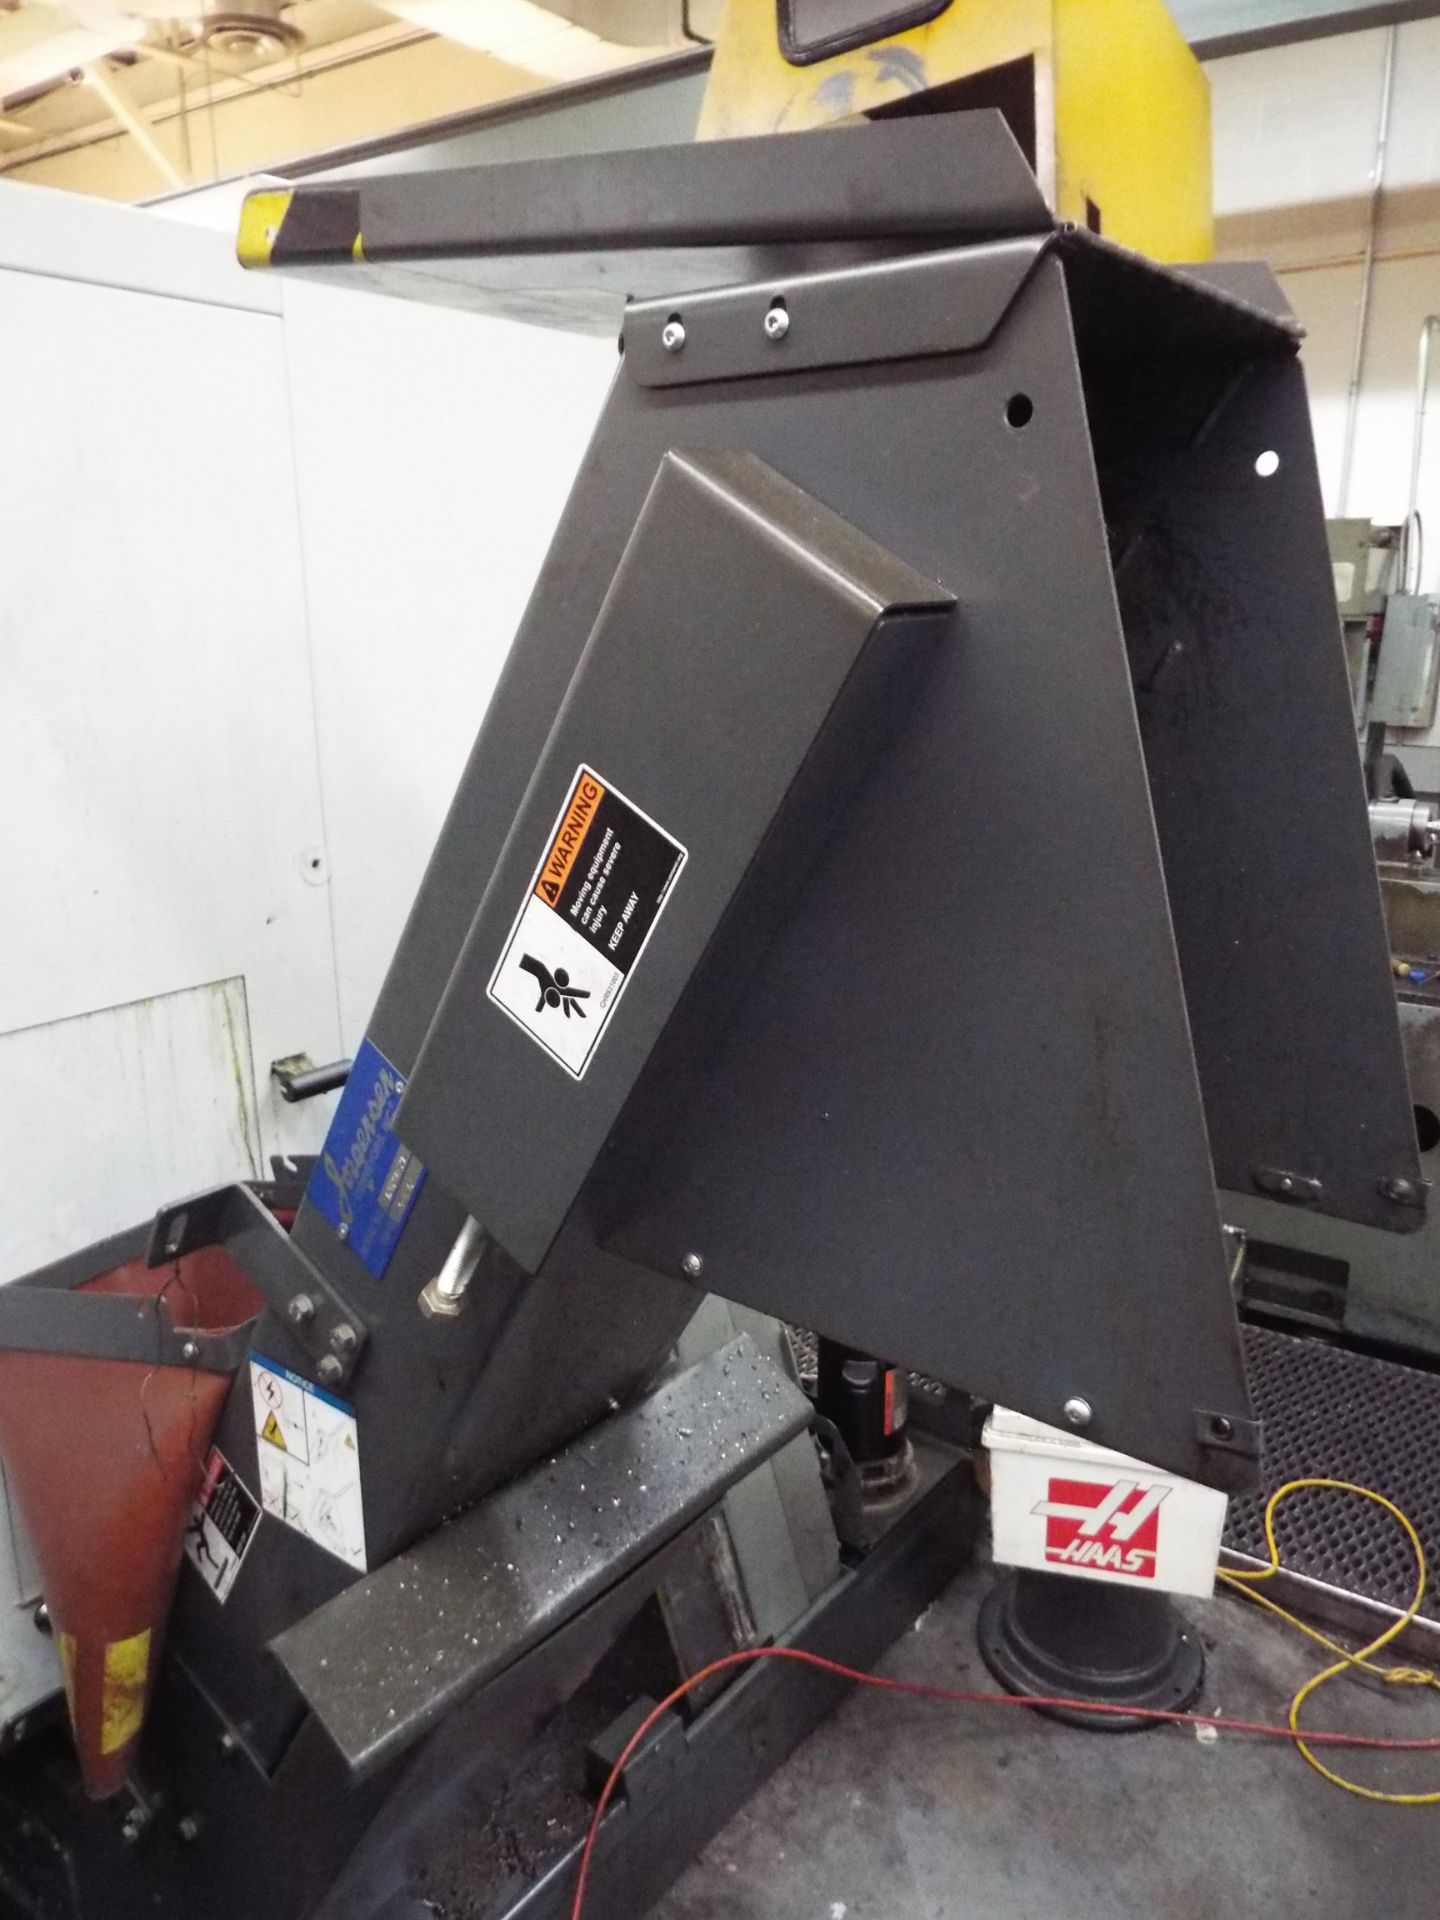 HAAS (2012) ST-30 CNC TURNING CENTER WITH HAAS CNC CONTROL, 12" 3 JAW CHUCK, 31" SWING OVER BED, 21" - Image 3 of 9